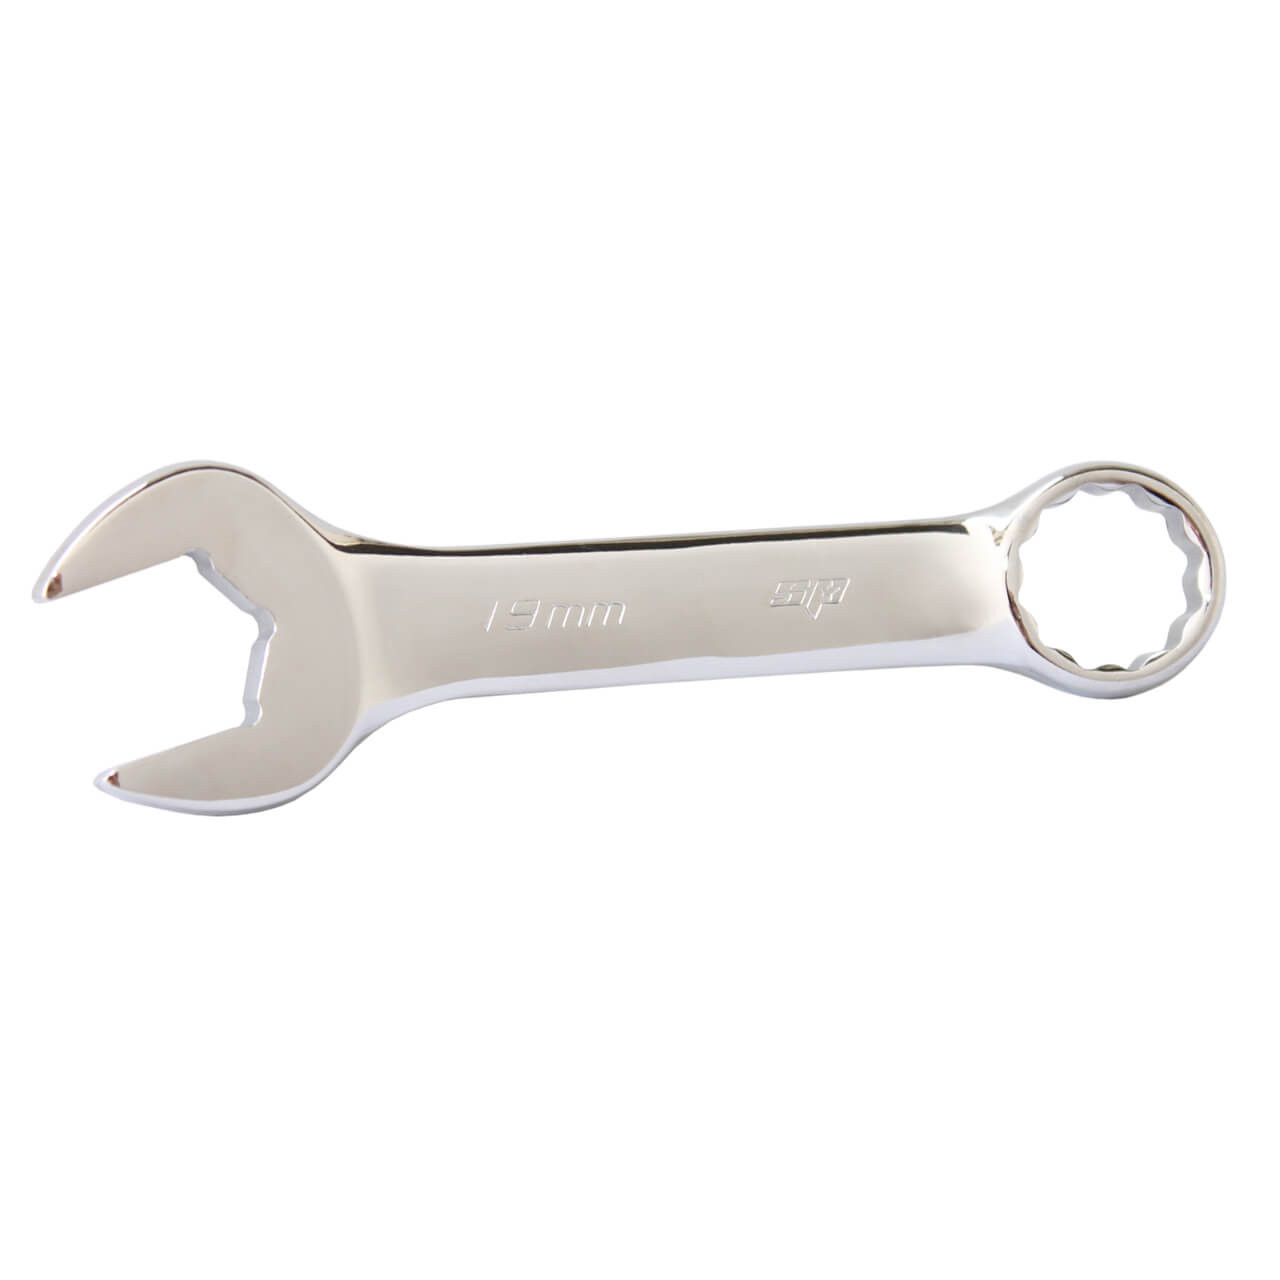 SP Tools 14mm Stubby Combination ROE Spanner Metric